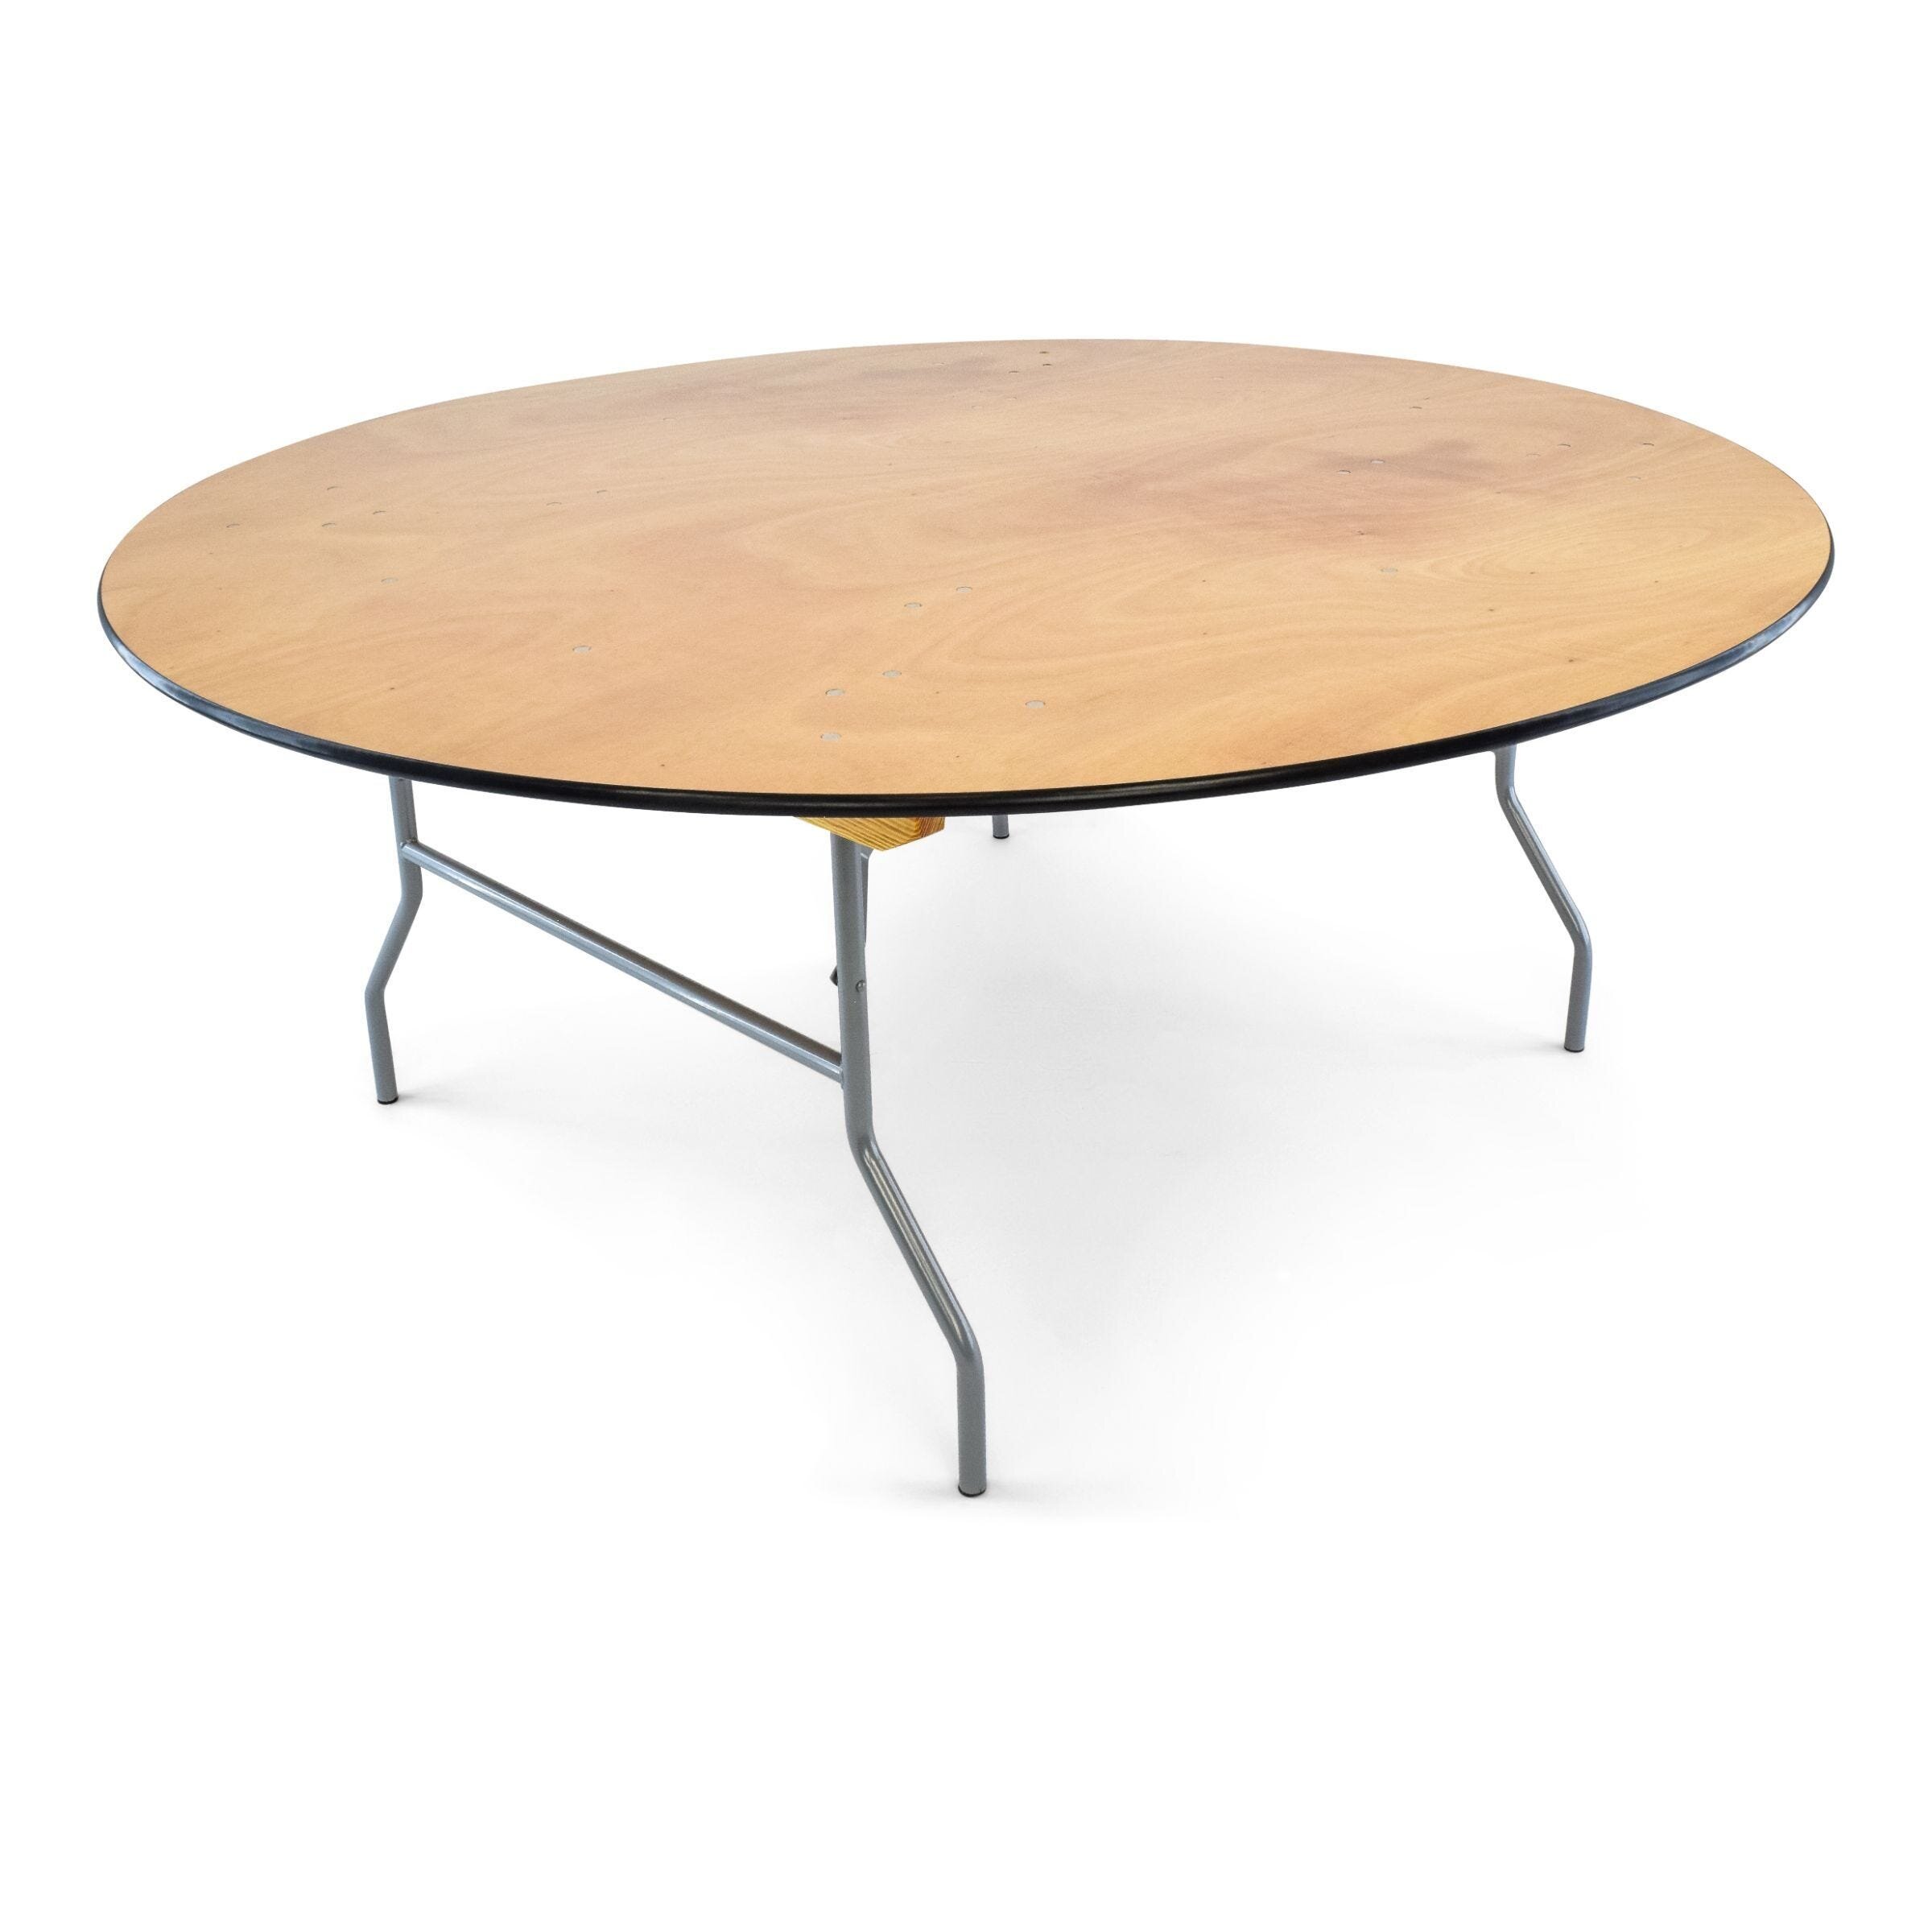 Round Tables - 48", 60", 72"